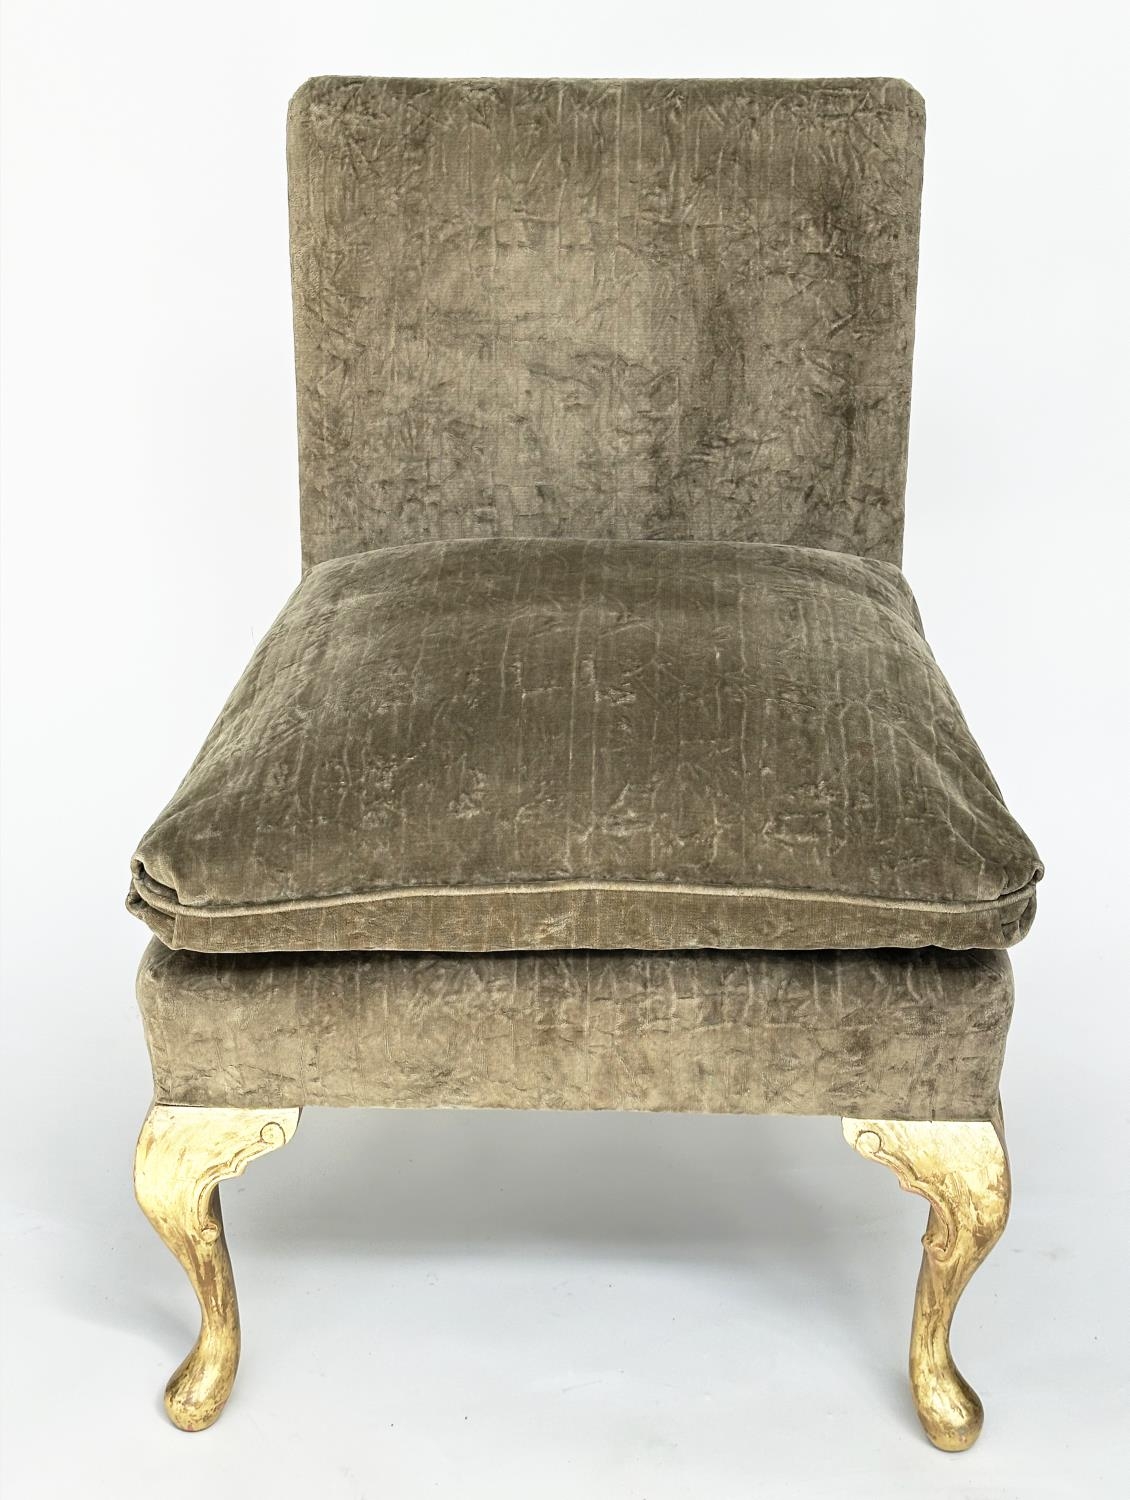 GEORGE SMITH SIDE CHAIR, teal green cut velvet upholstery and hand leaf gilded supports, 67cm W. - Image 3 of 8